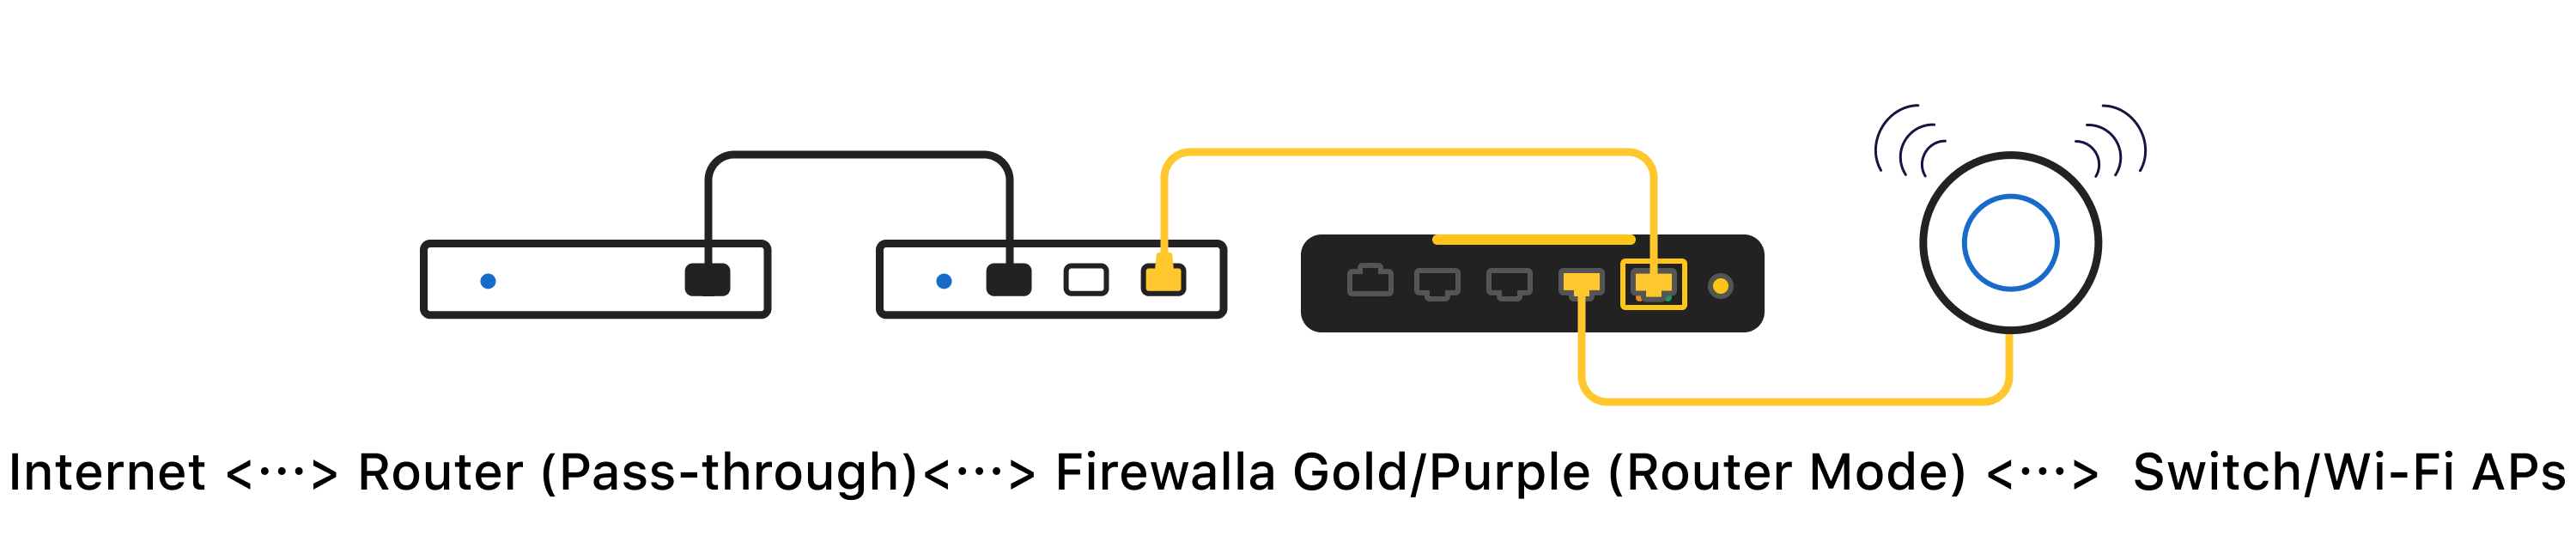 Firewalla Gold diagram featuring Internet, AT&T Router in passthrough mode, Gold/Purple in router mode, and Switch/WiFi APs